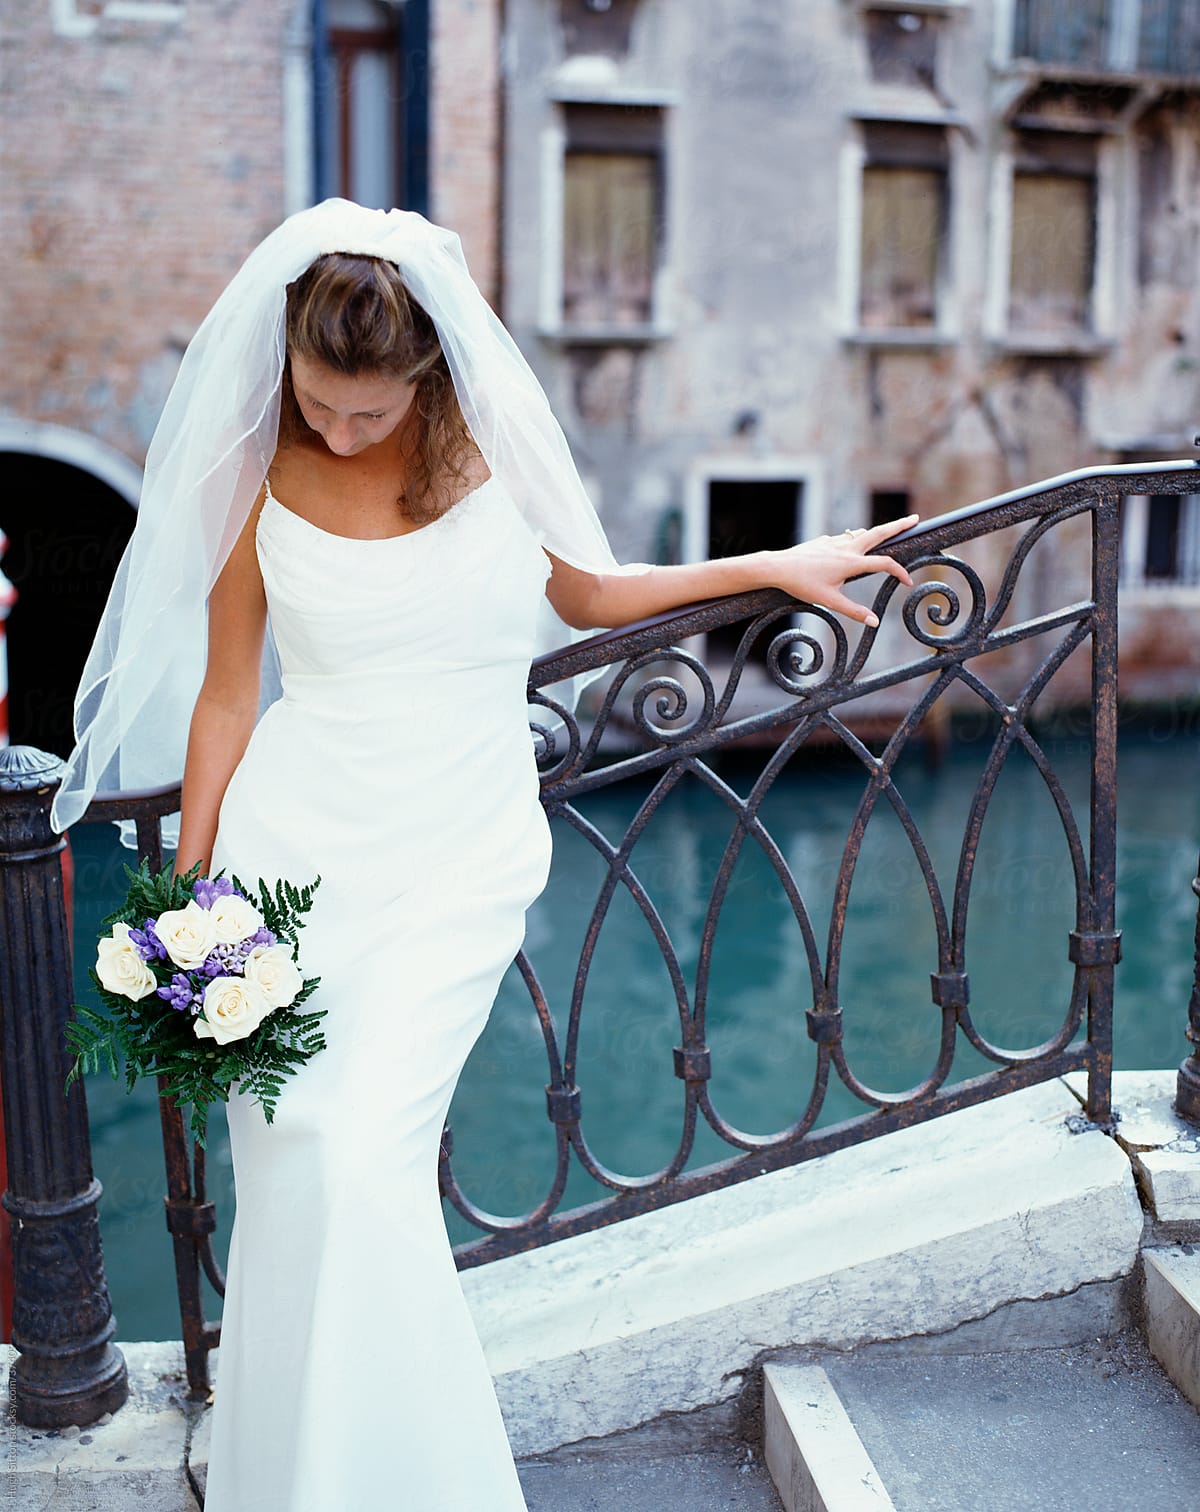 Bride in wedding dress standing next to the canals of Venice.